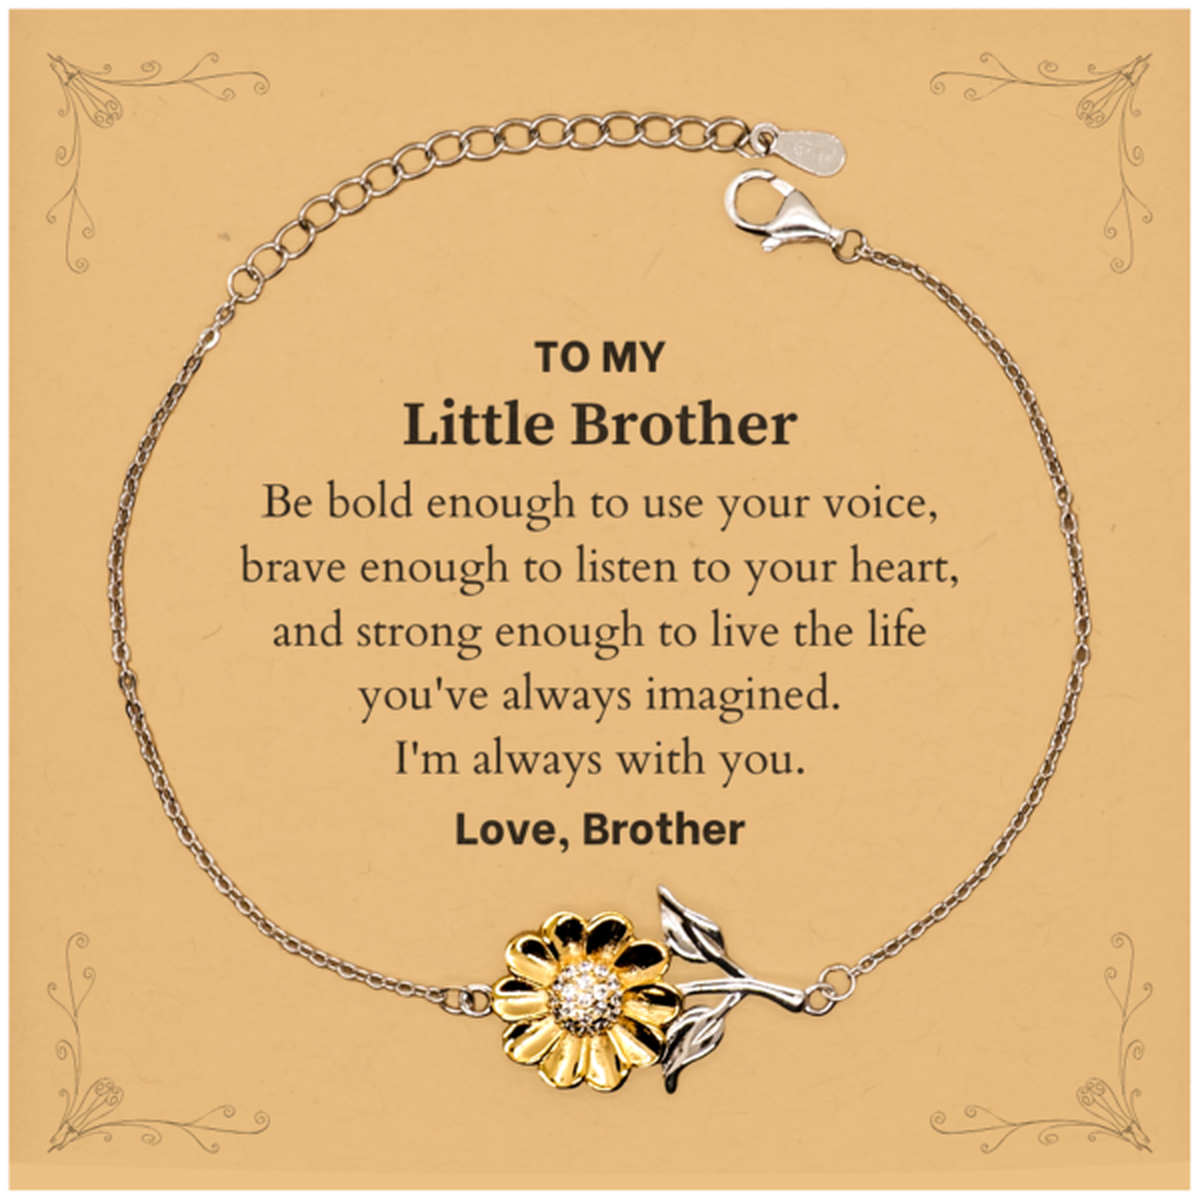 Keepsake Little Brother Sunflower Bracelet Gift Idea Graduation Christmas Birthday Little Brother from Brother, Little Brother Be bold enough to use your voice, brave enough to listen to your heart. Love, Brother